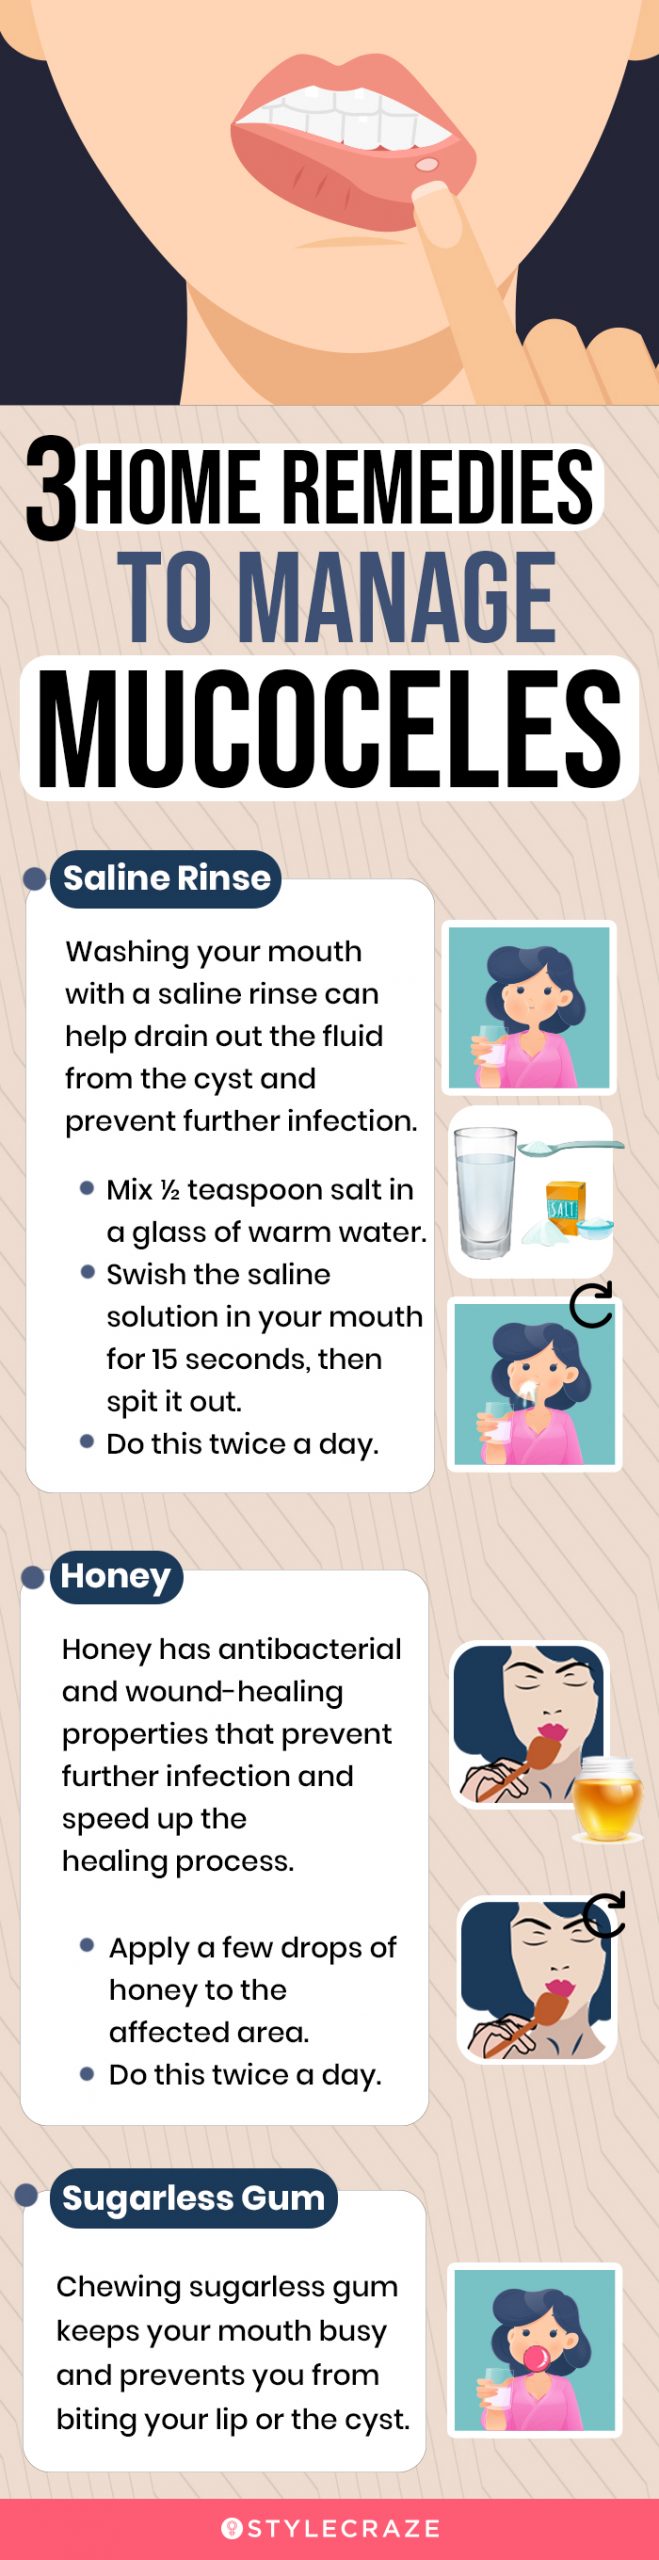 3 home remedies to manage mucoceles (infographic)